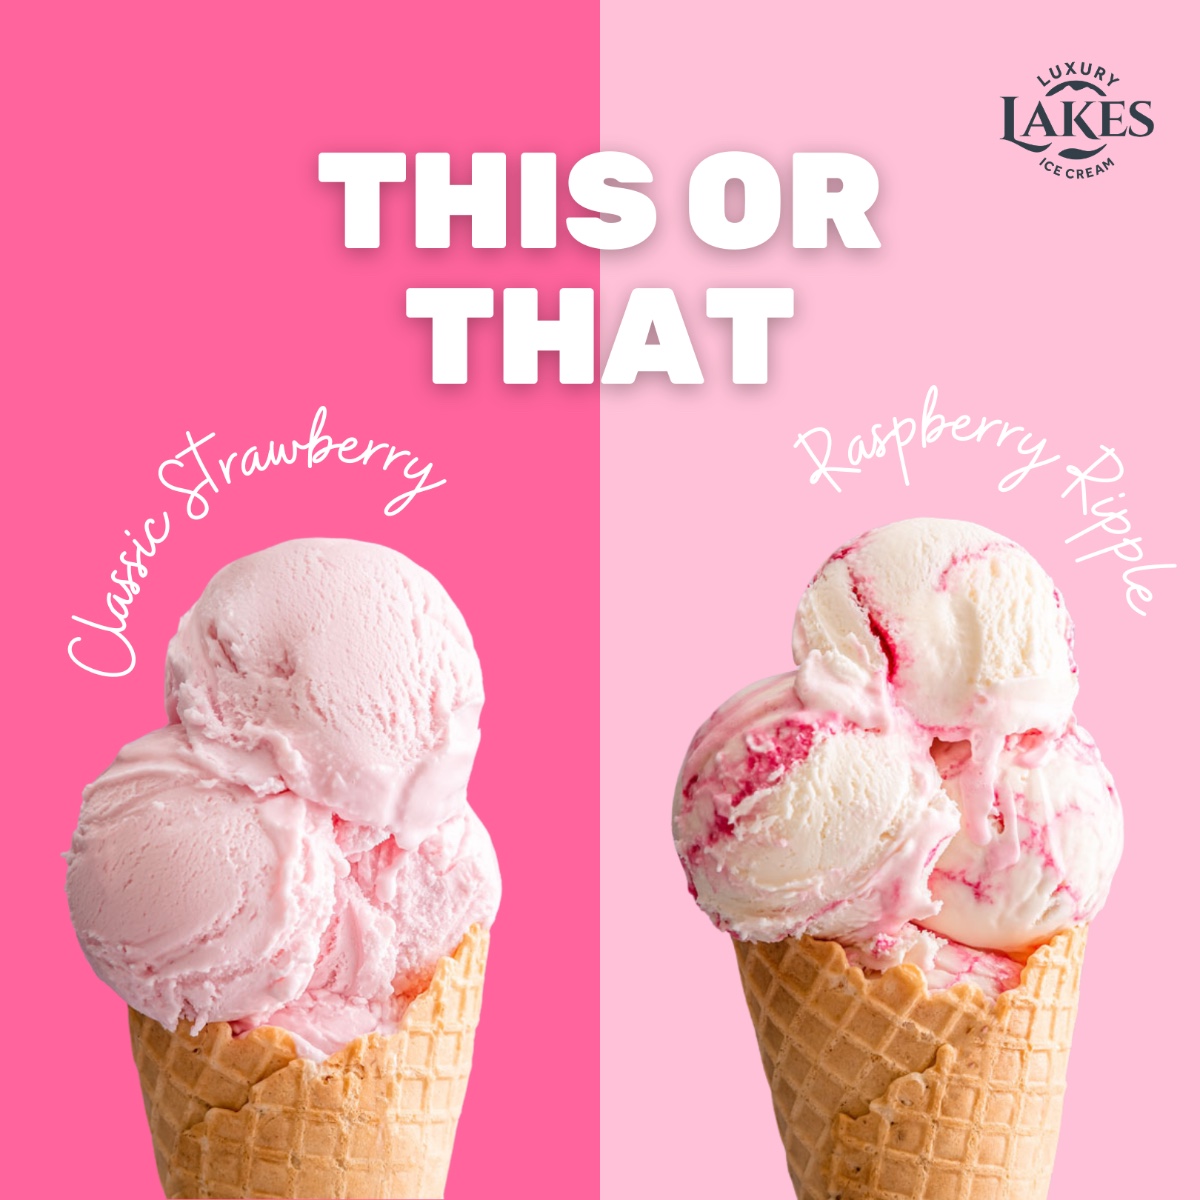 On Wednesdays we wear pink… 🎀 But which one? Choose the #Pink you think makes the ultimate treat!